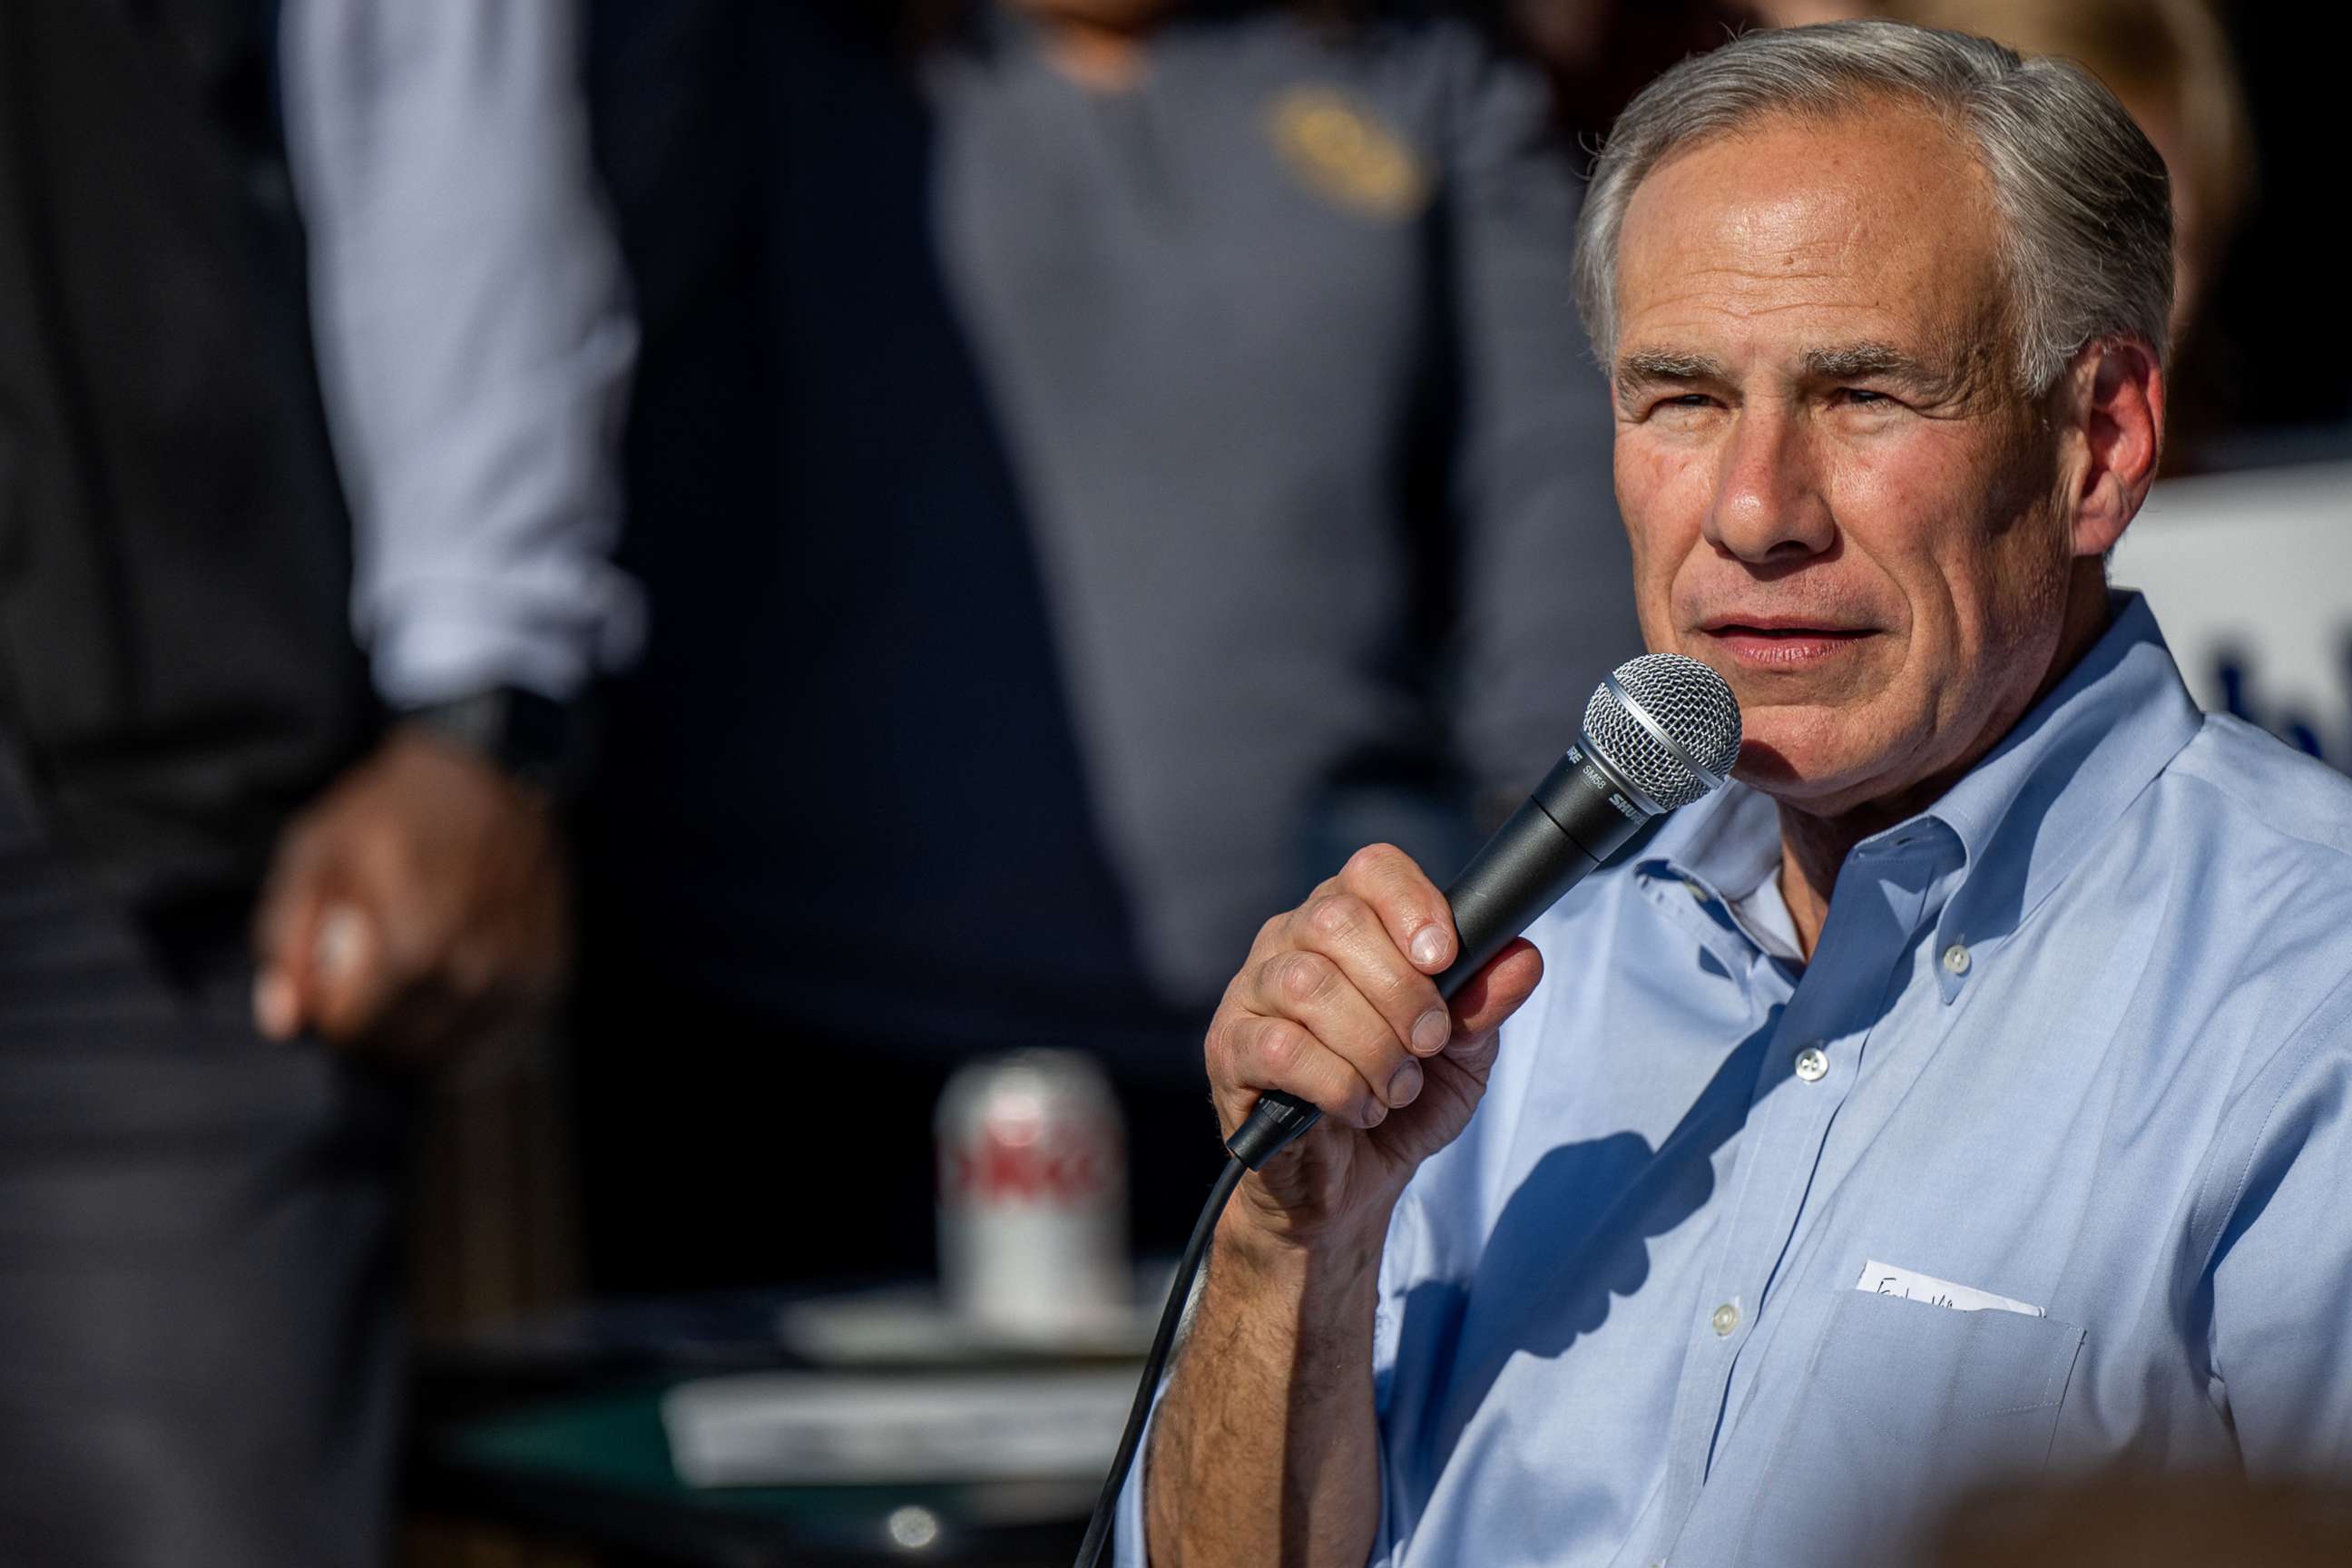 PHOTO: In this Oct. 27, 2022, file photo, Texas Gov. Greg Abbott speaks during a 'Get Out The Vote' rally in Katy, Texas.